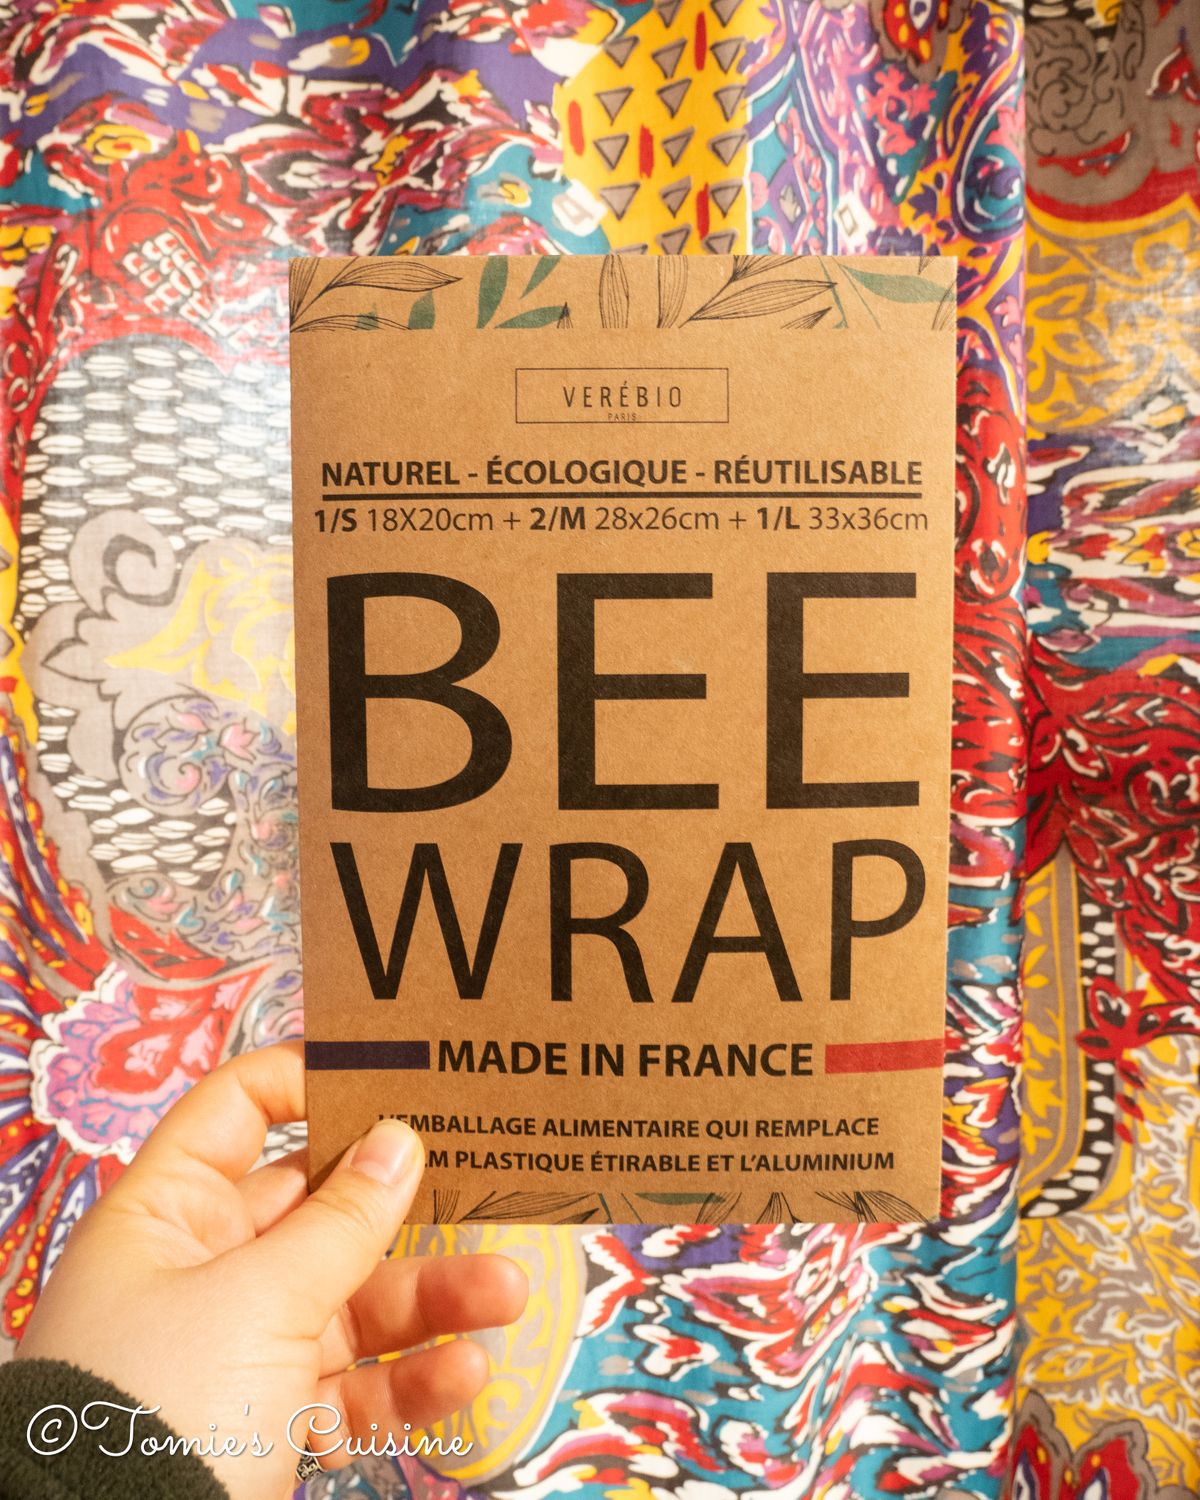 Beeswax wrap review and recommendations